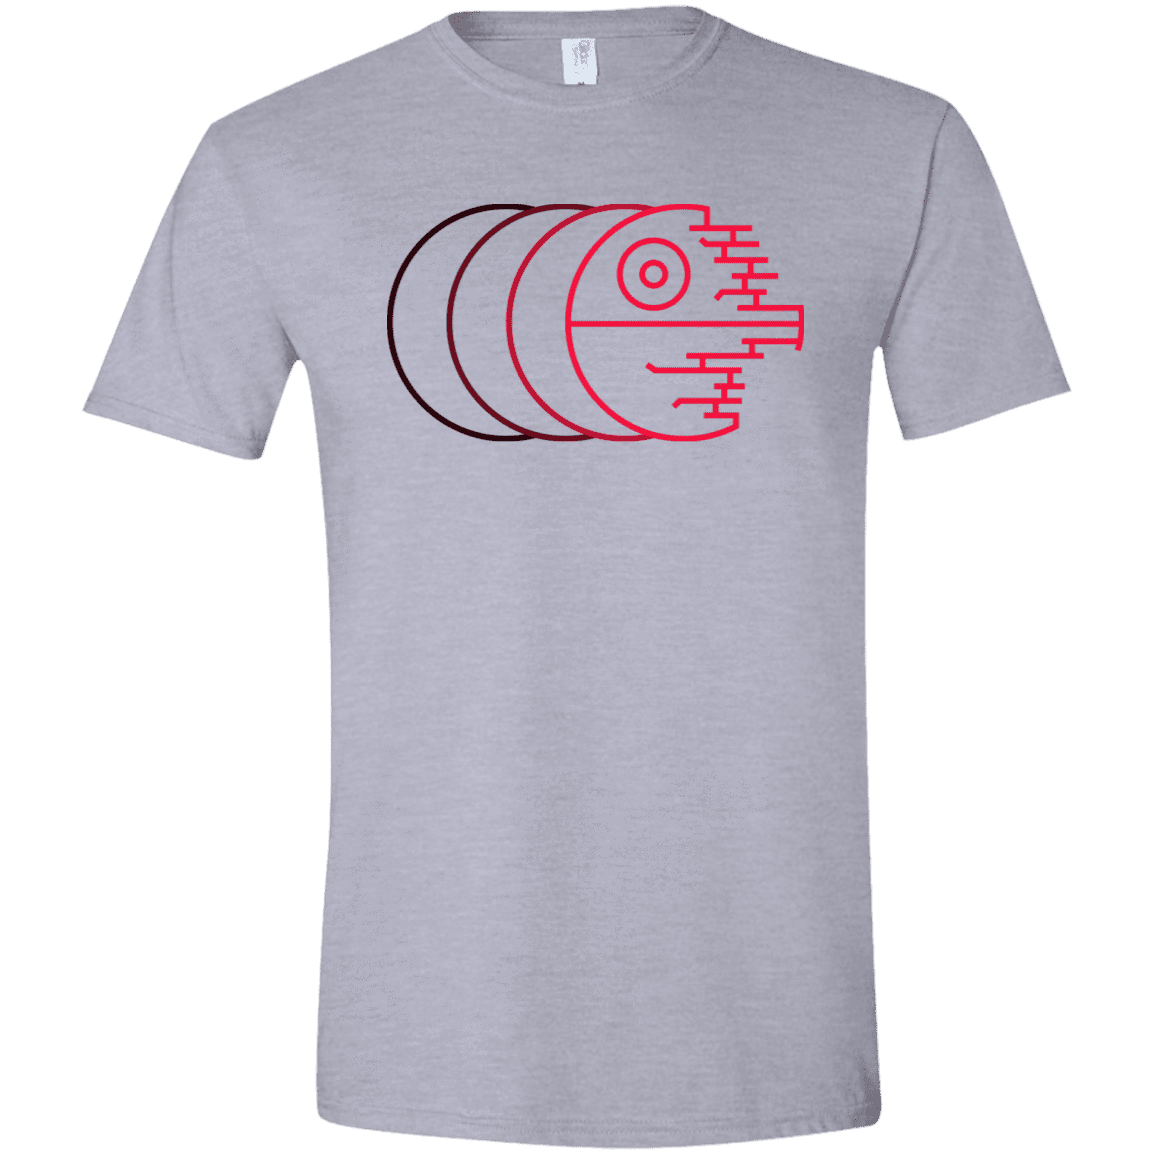 T-Shirts Sport Grey / X-Small Fully Operational Men's Semi-Fitted Softstyle